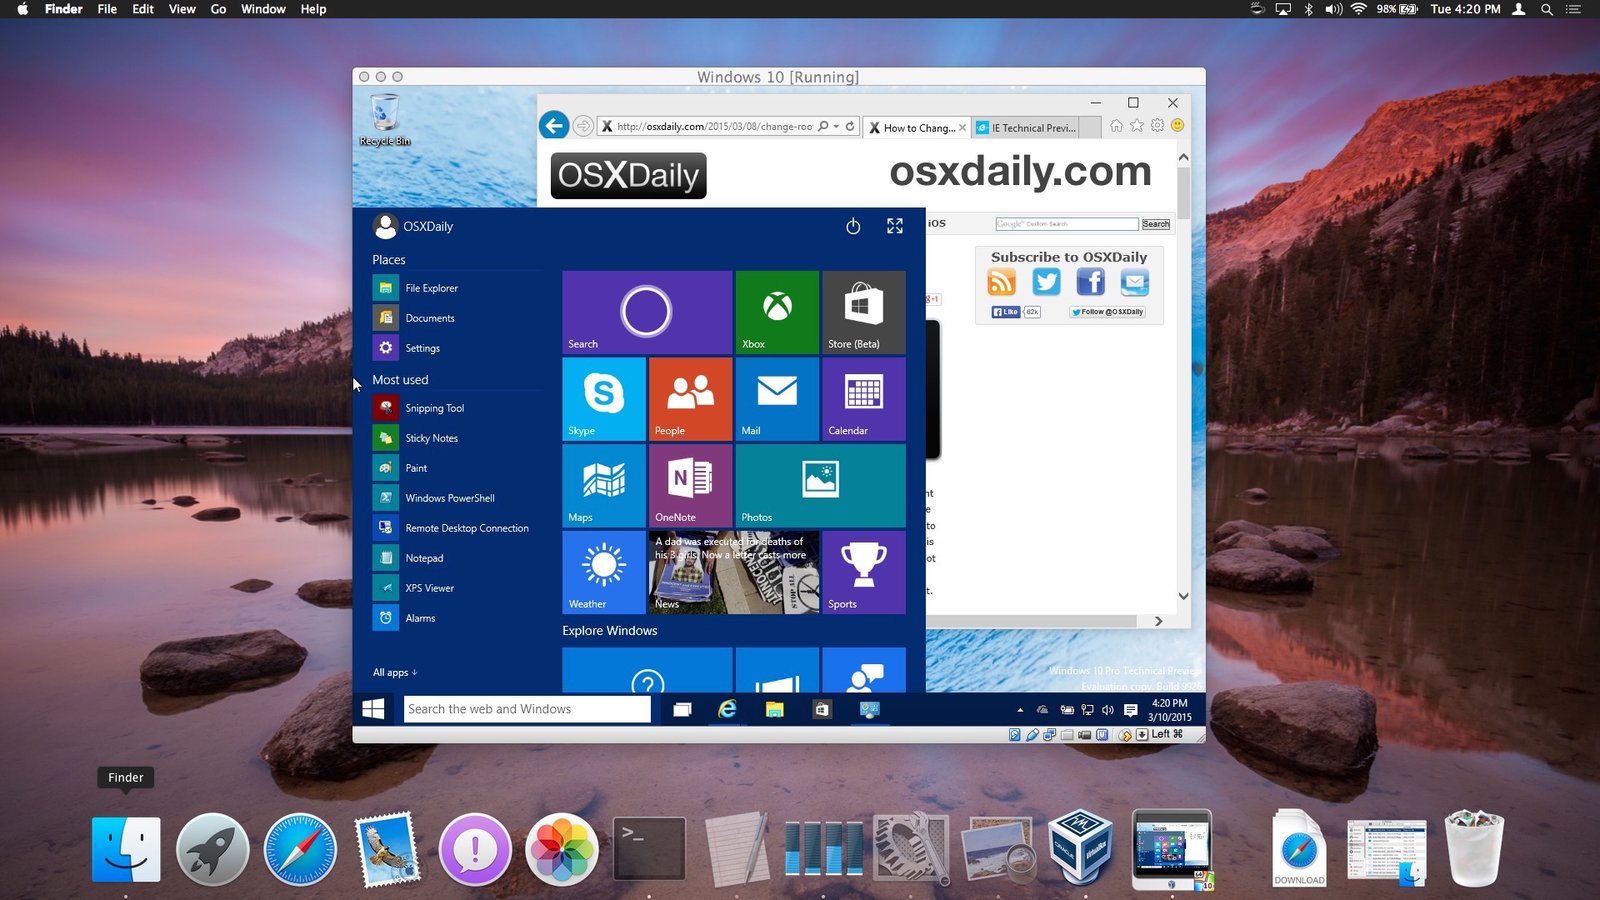 How to Install Windows 10 on Mac with Virtualbox VM